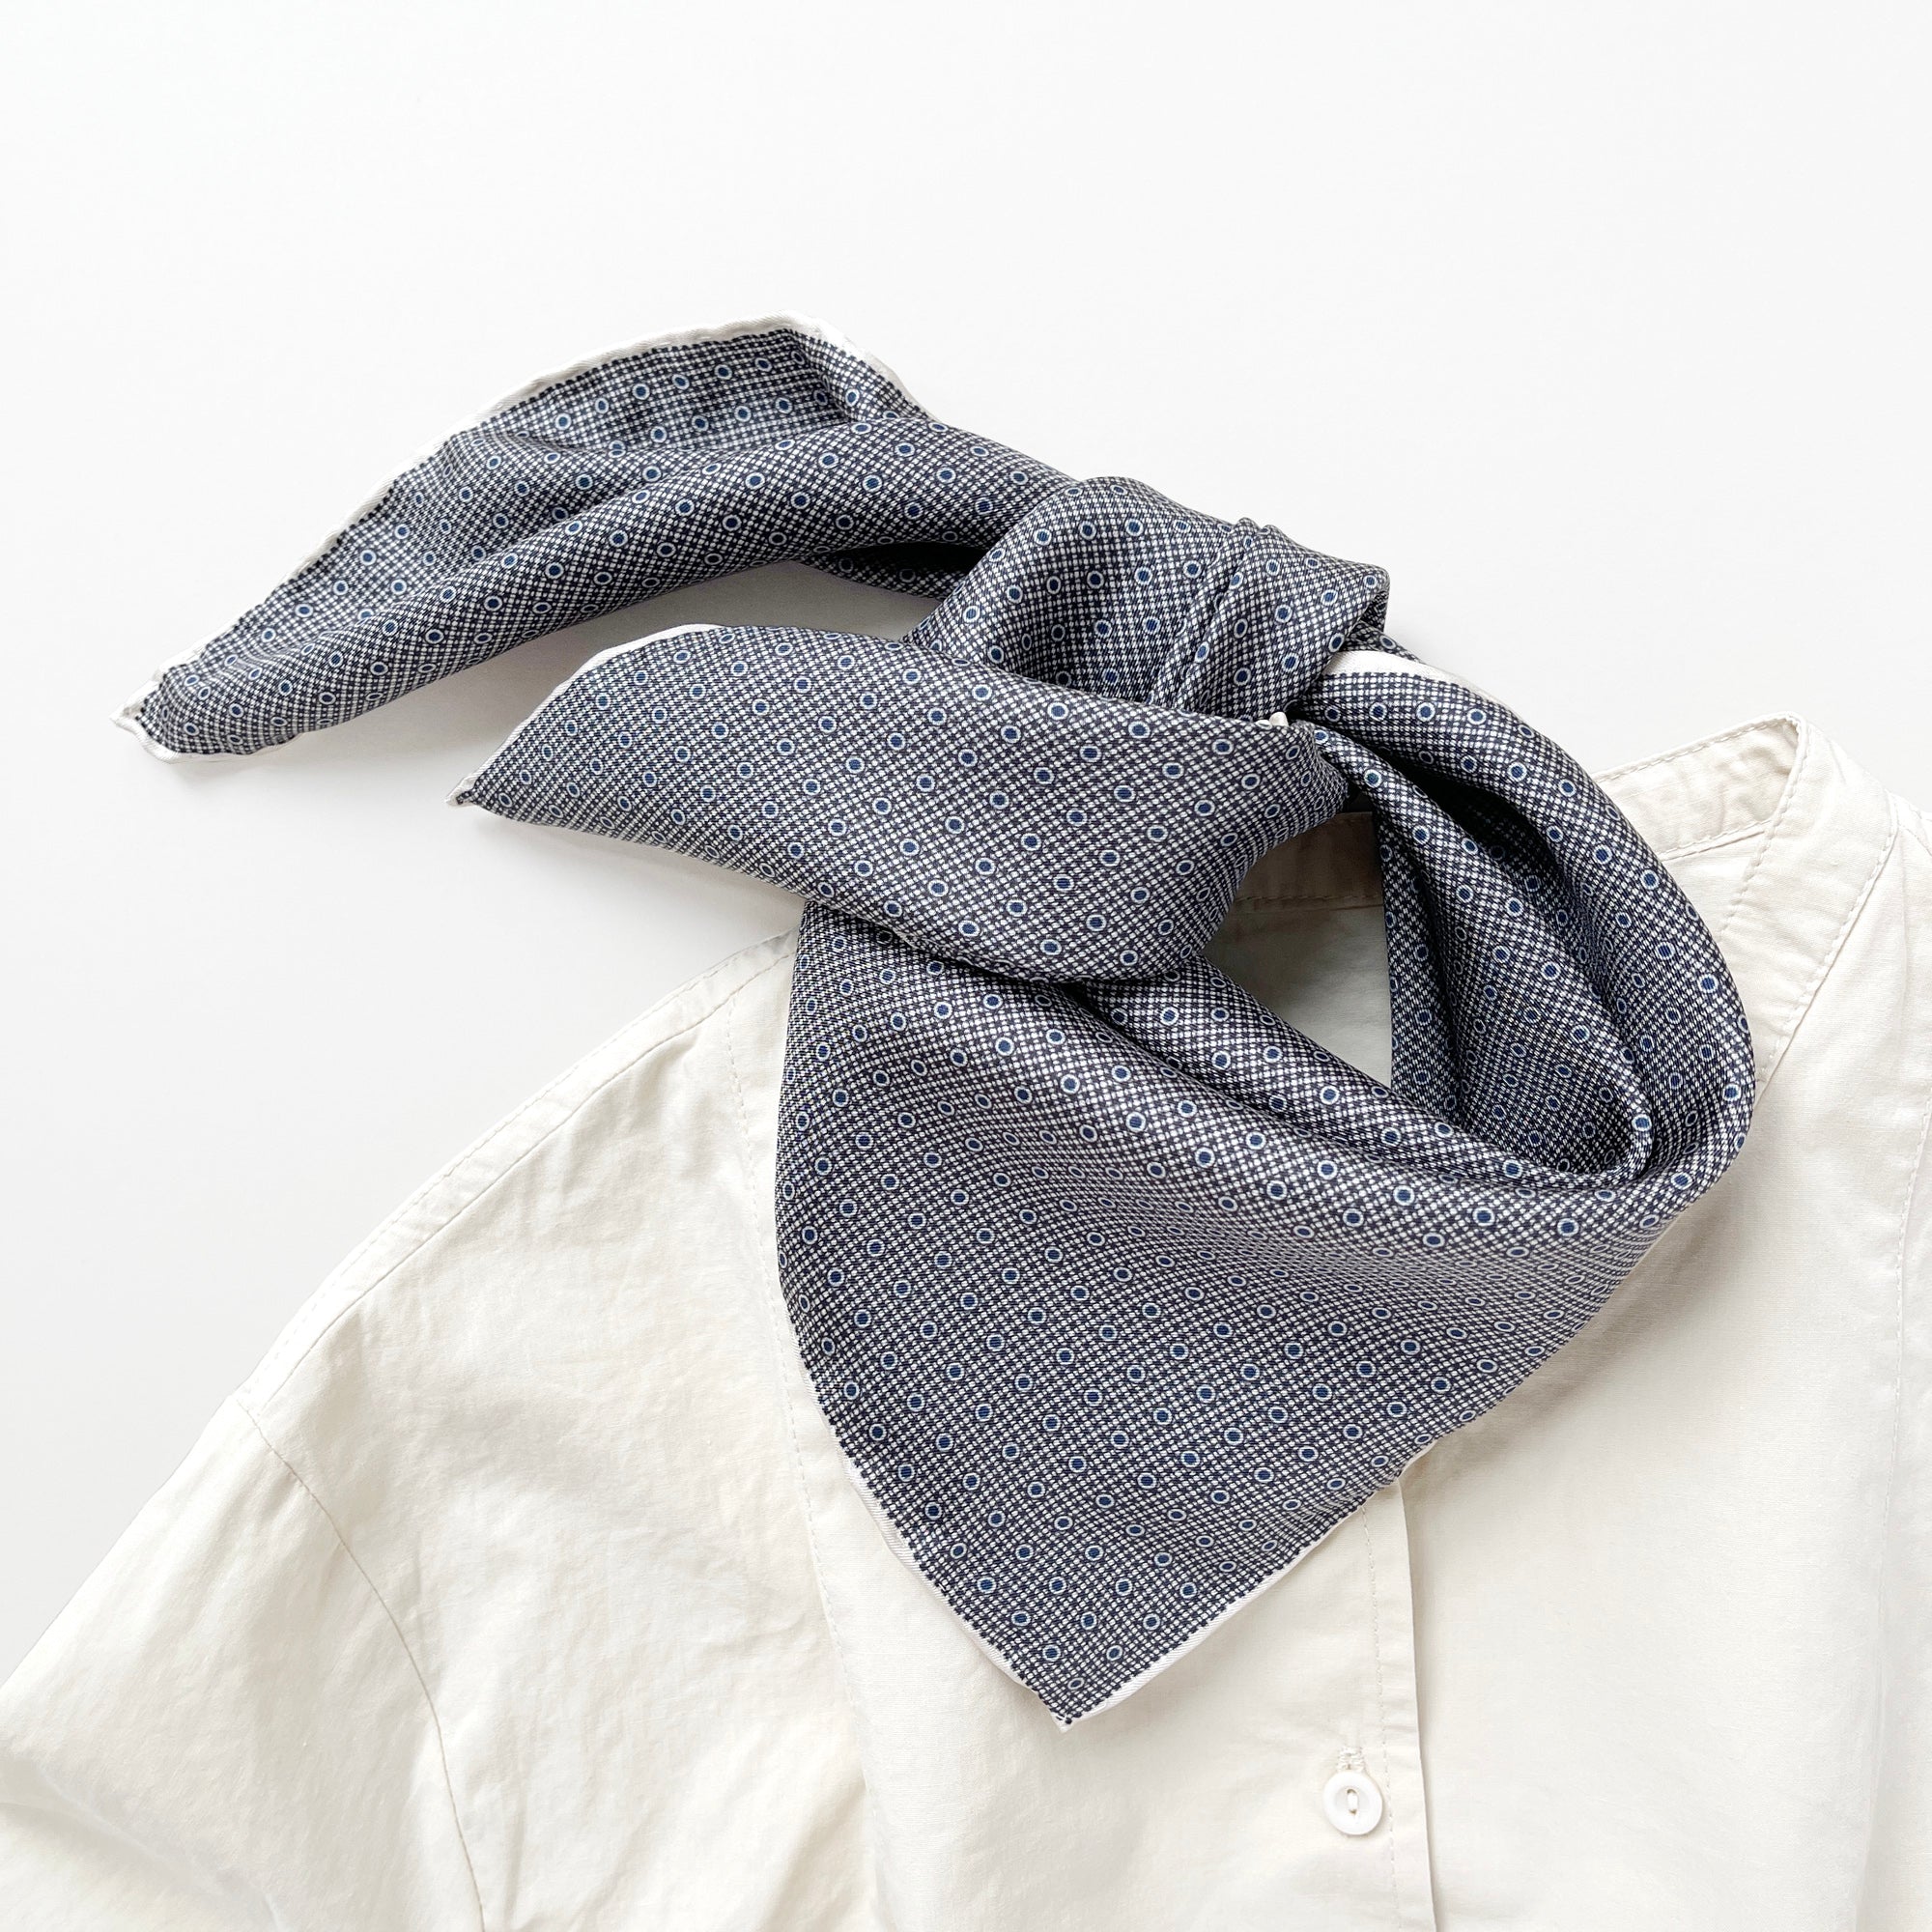 a classic silk scarf neckerchief featuring black and white checks and navy blue polka dots with white hand-rolled hems, tie around the neck as triangle fold, paired with a light beige shirt